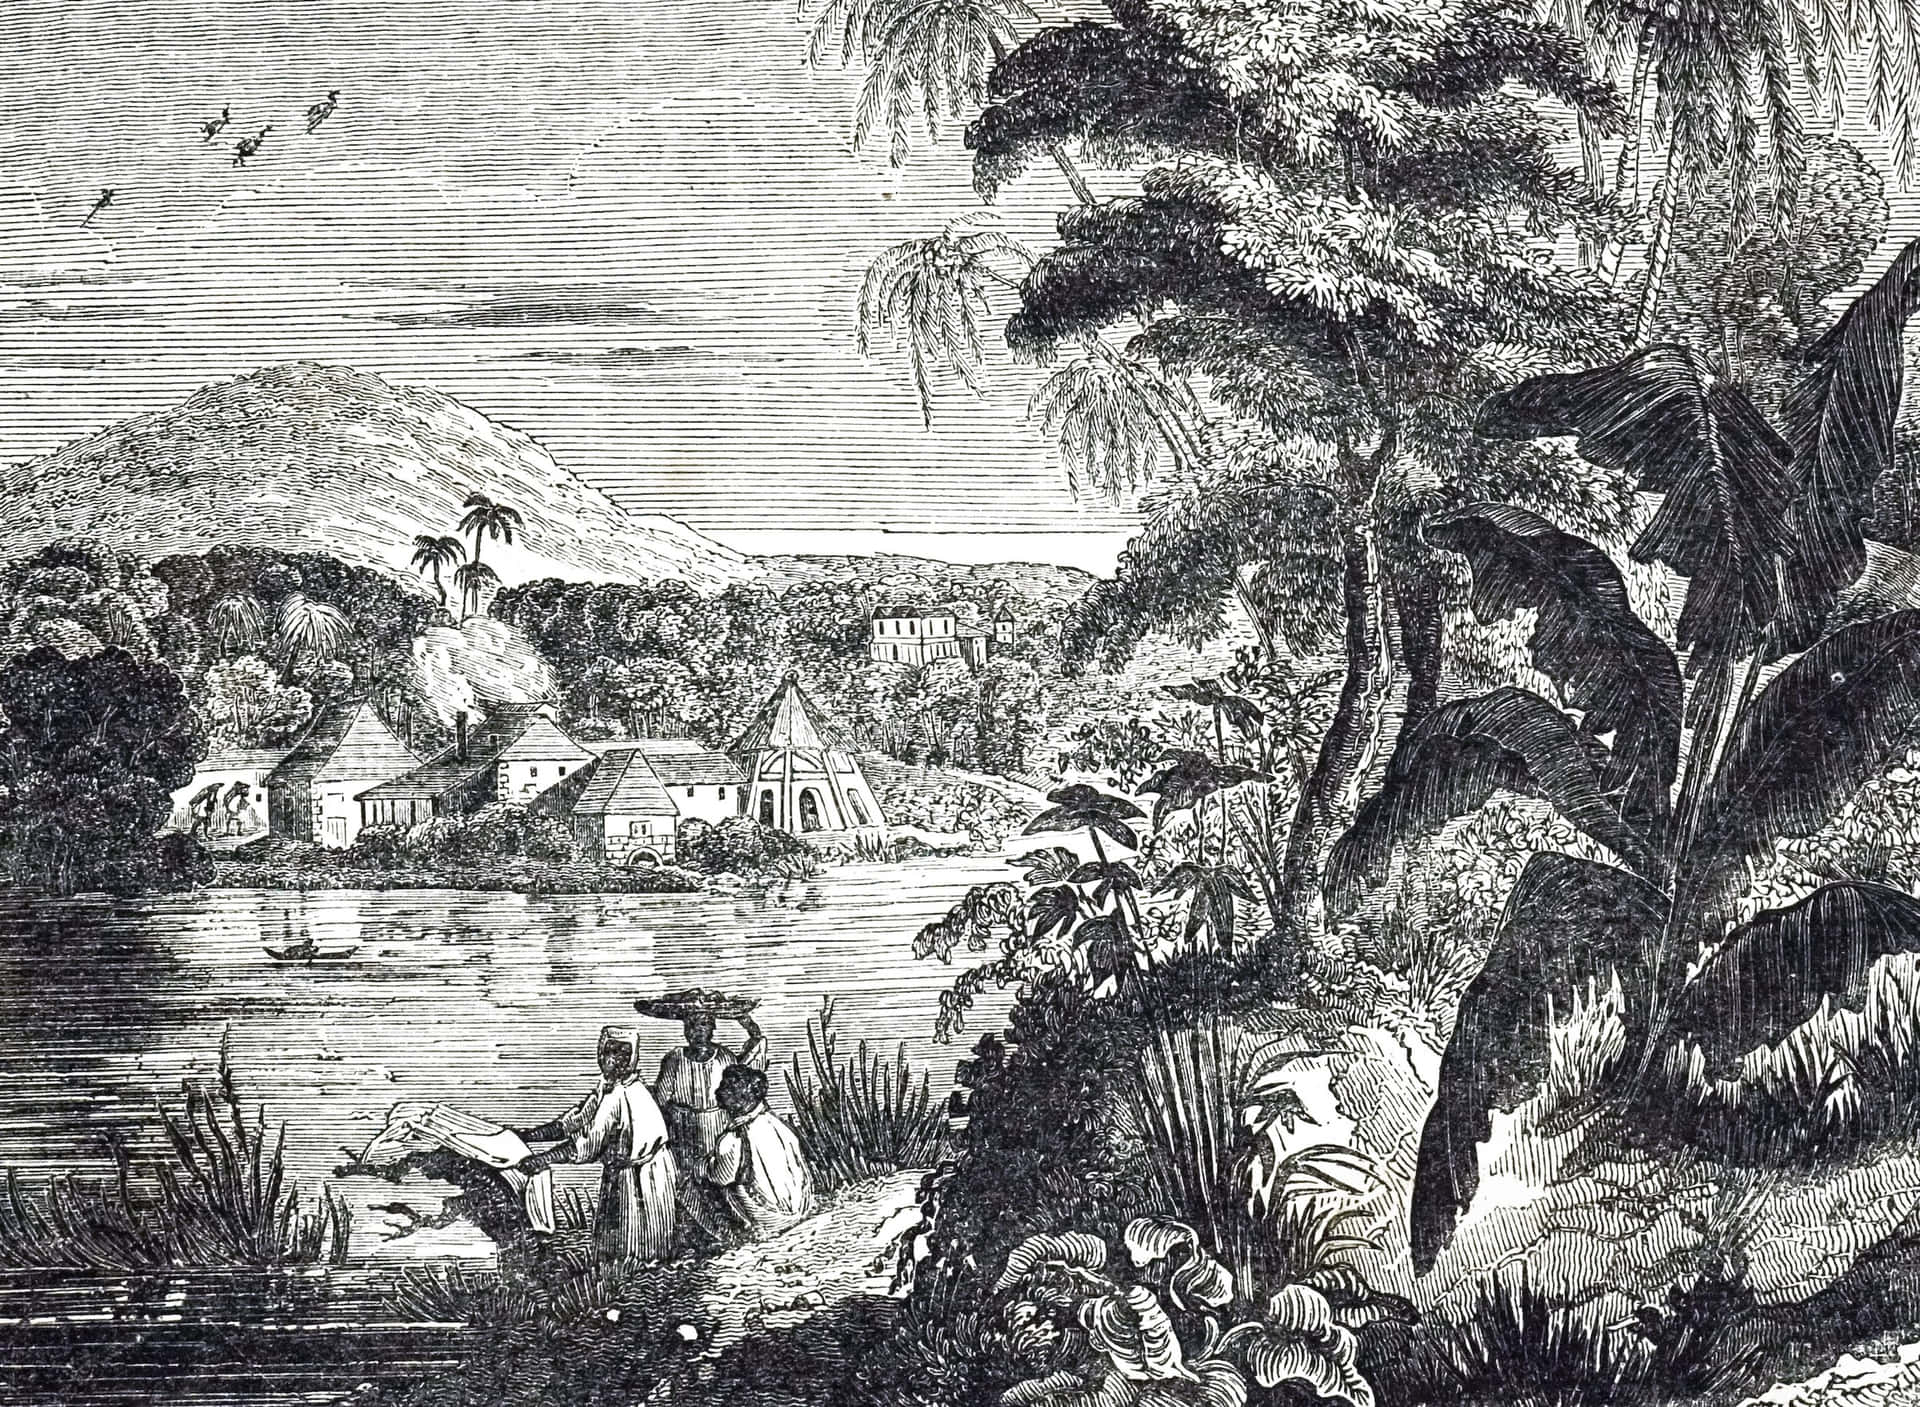 An Engraving Of A Scene With People And Trees